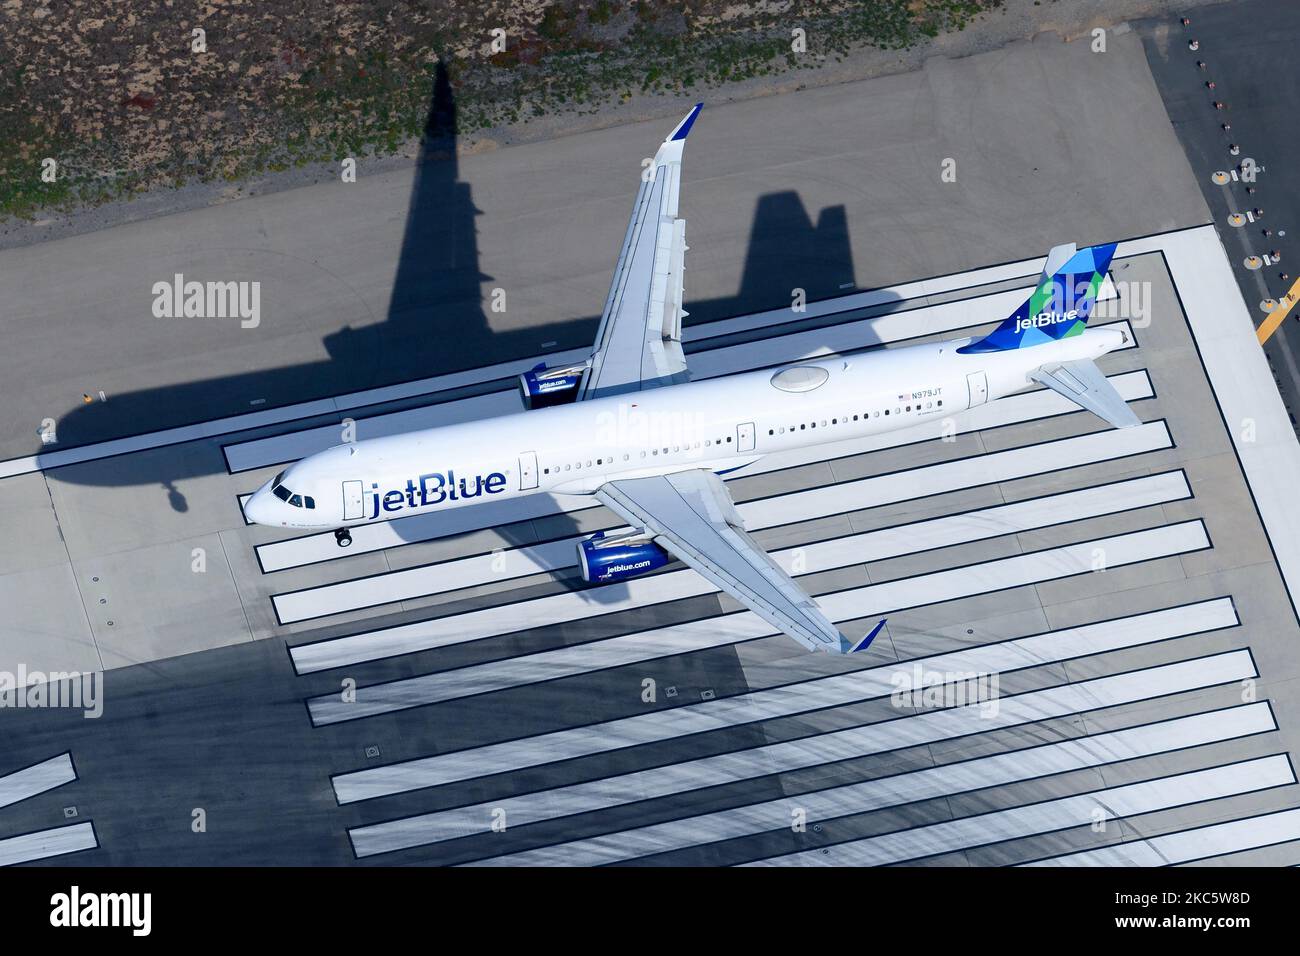 Jetblue Airways Airbus A321 airplane landing on runway, Aircraft A321 of Jet Blue airline registered as N979JT. Plane with winglets. Stock Photo